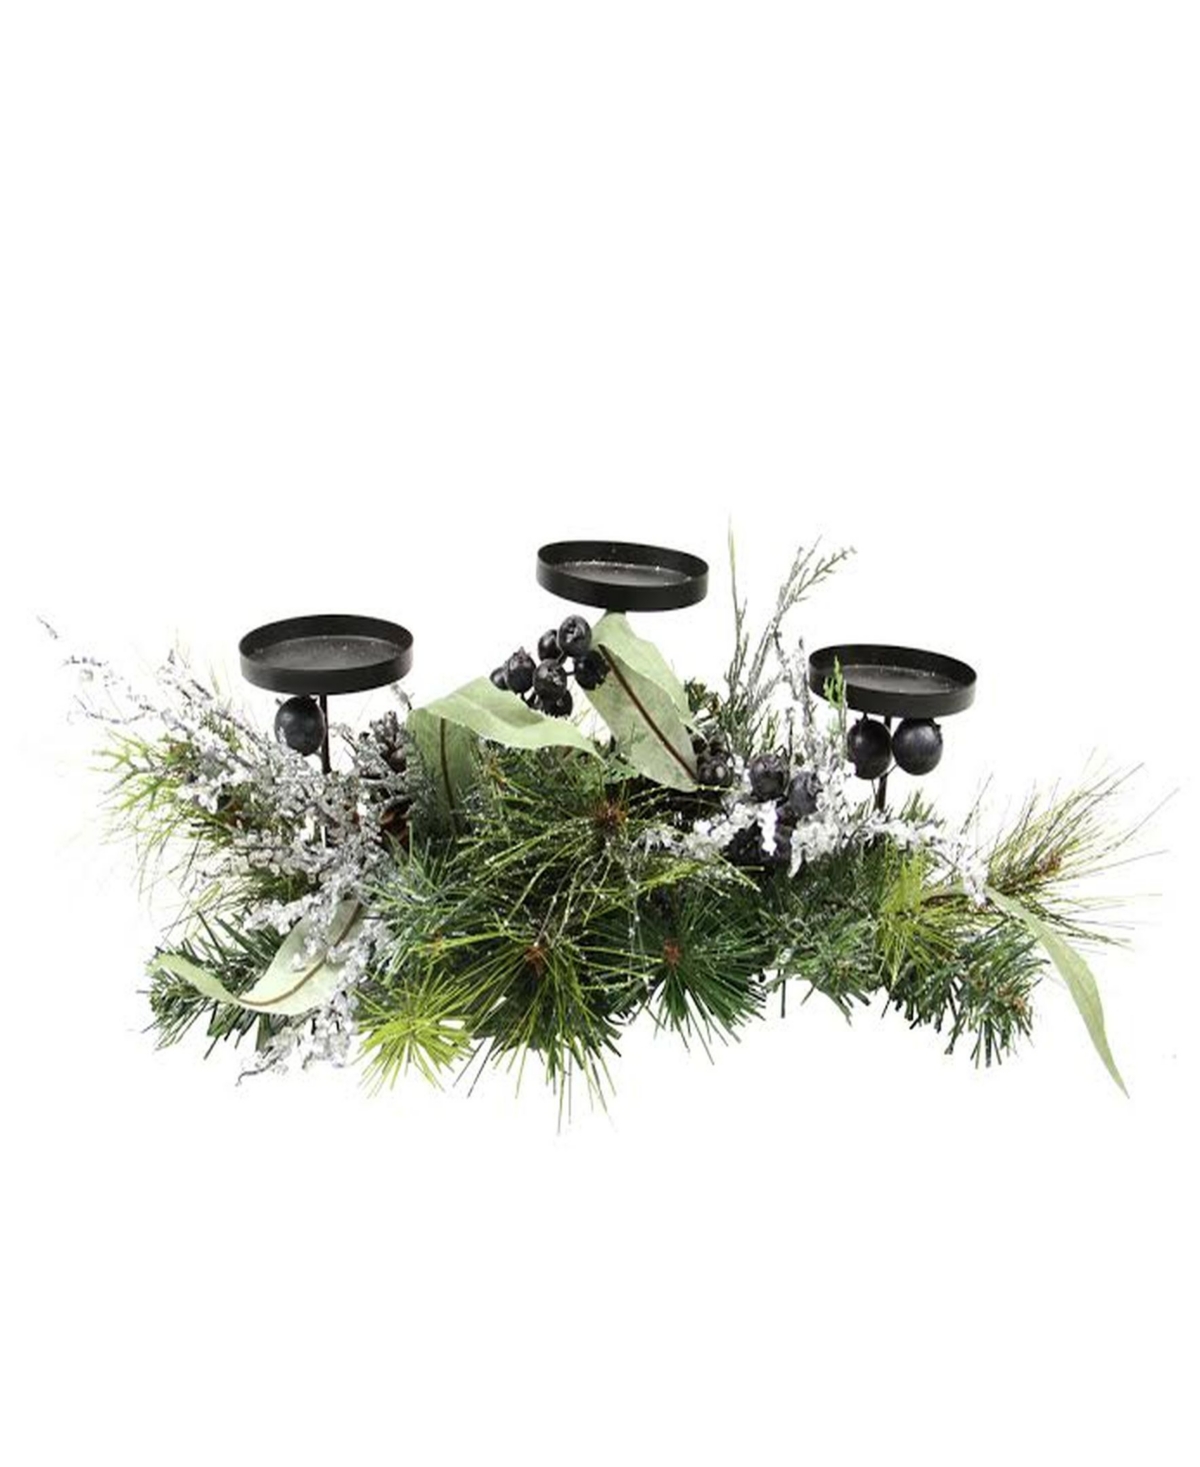 22" Mixed Pine with Blueberries Christmas Candle Holder Centerpiece - Green